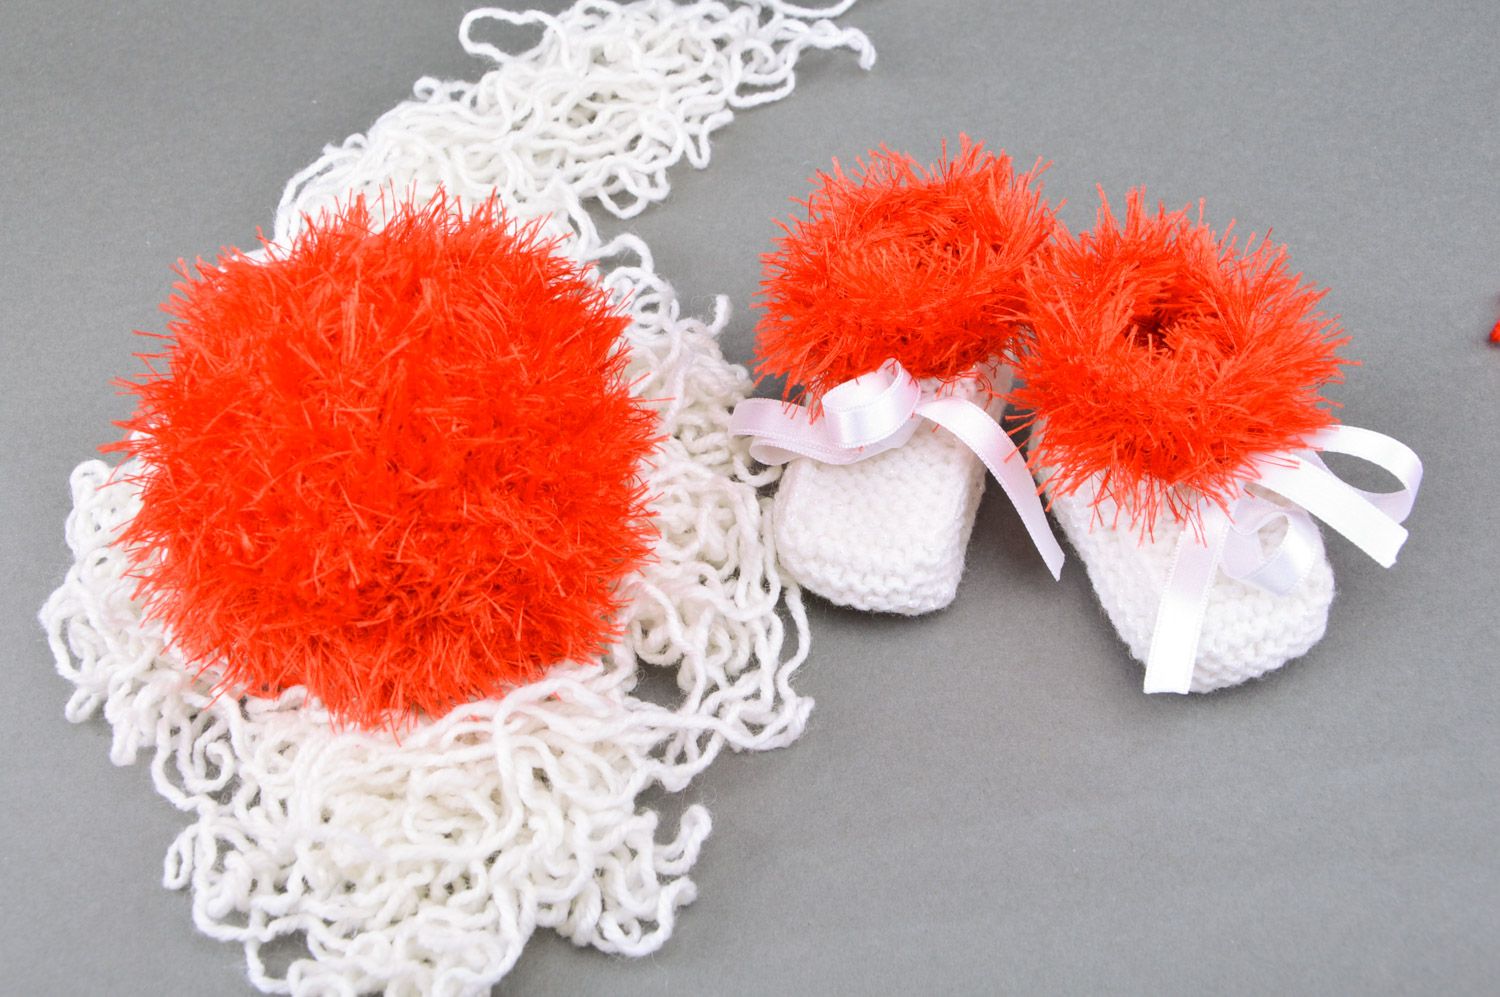 Handmade crochet soft toy ball and knitted baby booties in red and white colors photo 1